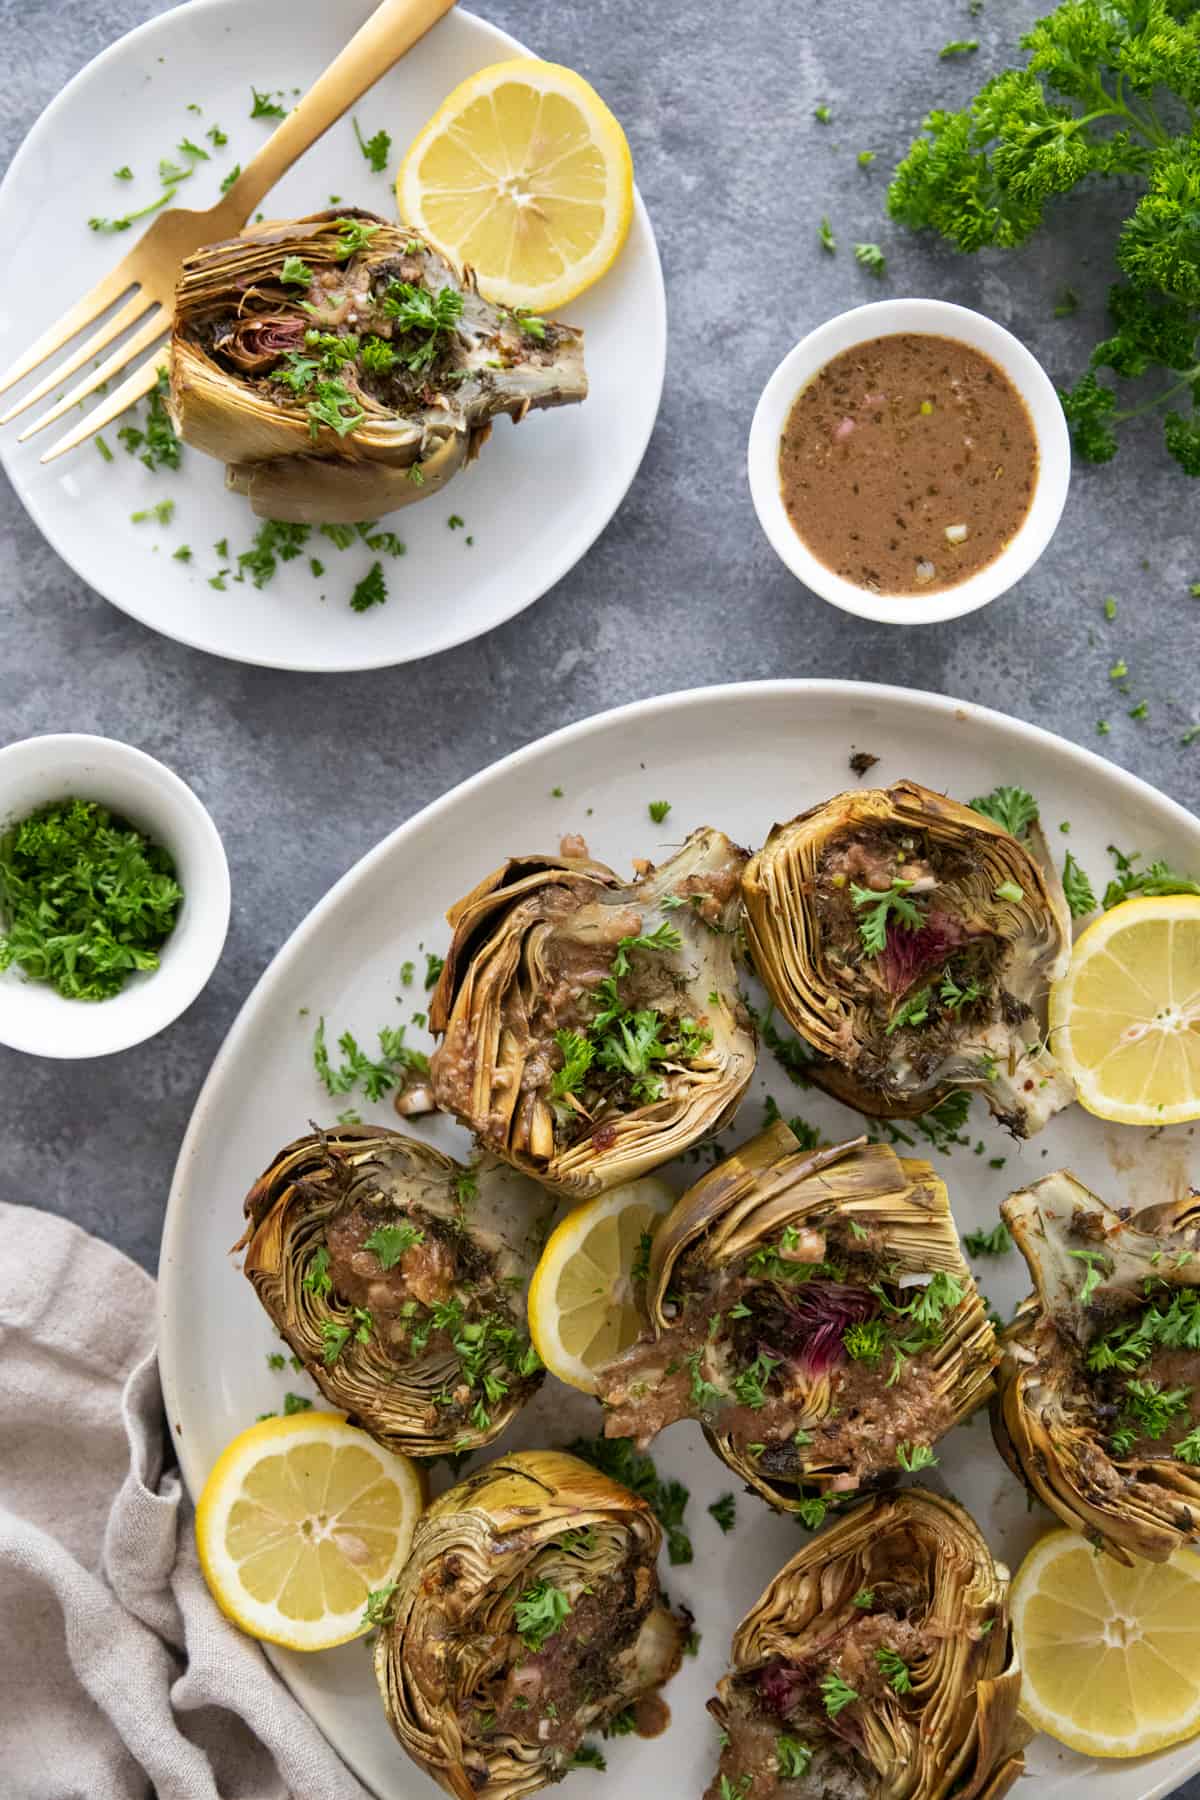 Roasted artichoke is easy to prepare and can be a crowd-pleasing appetizer. Each artichoke is cut in half and roasted to perfection with olive oil, garlic and herbs, making them tender and delicious in every bite.
